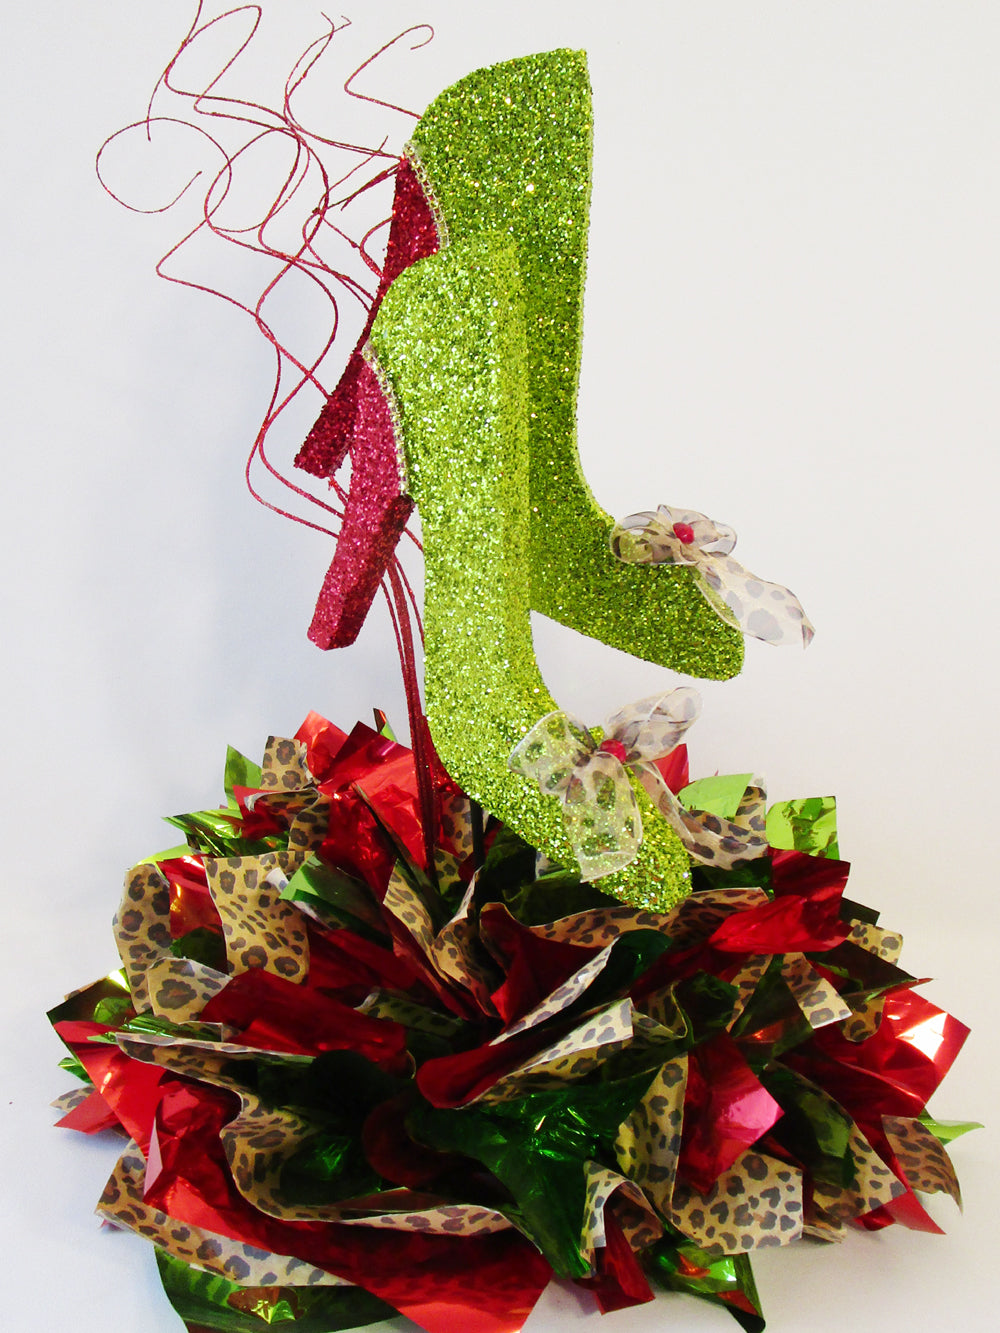 High heel shoes, lime green,red,& leopard themed centerpiece - Designs by Ginny